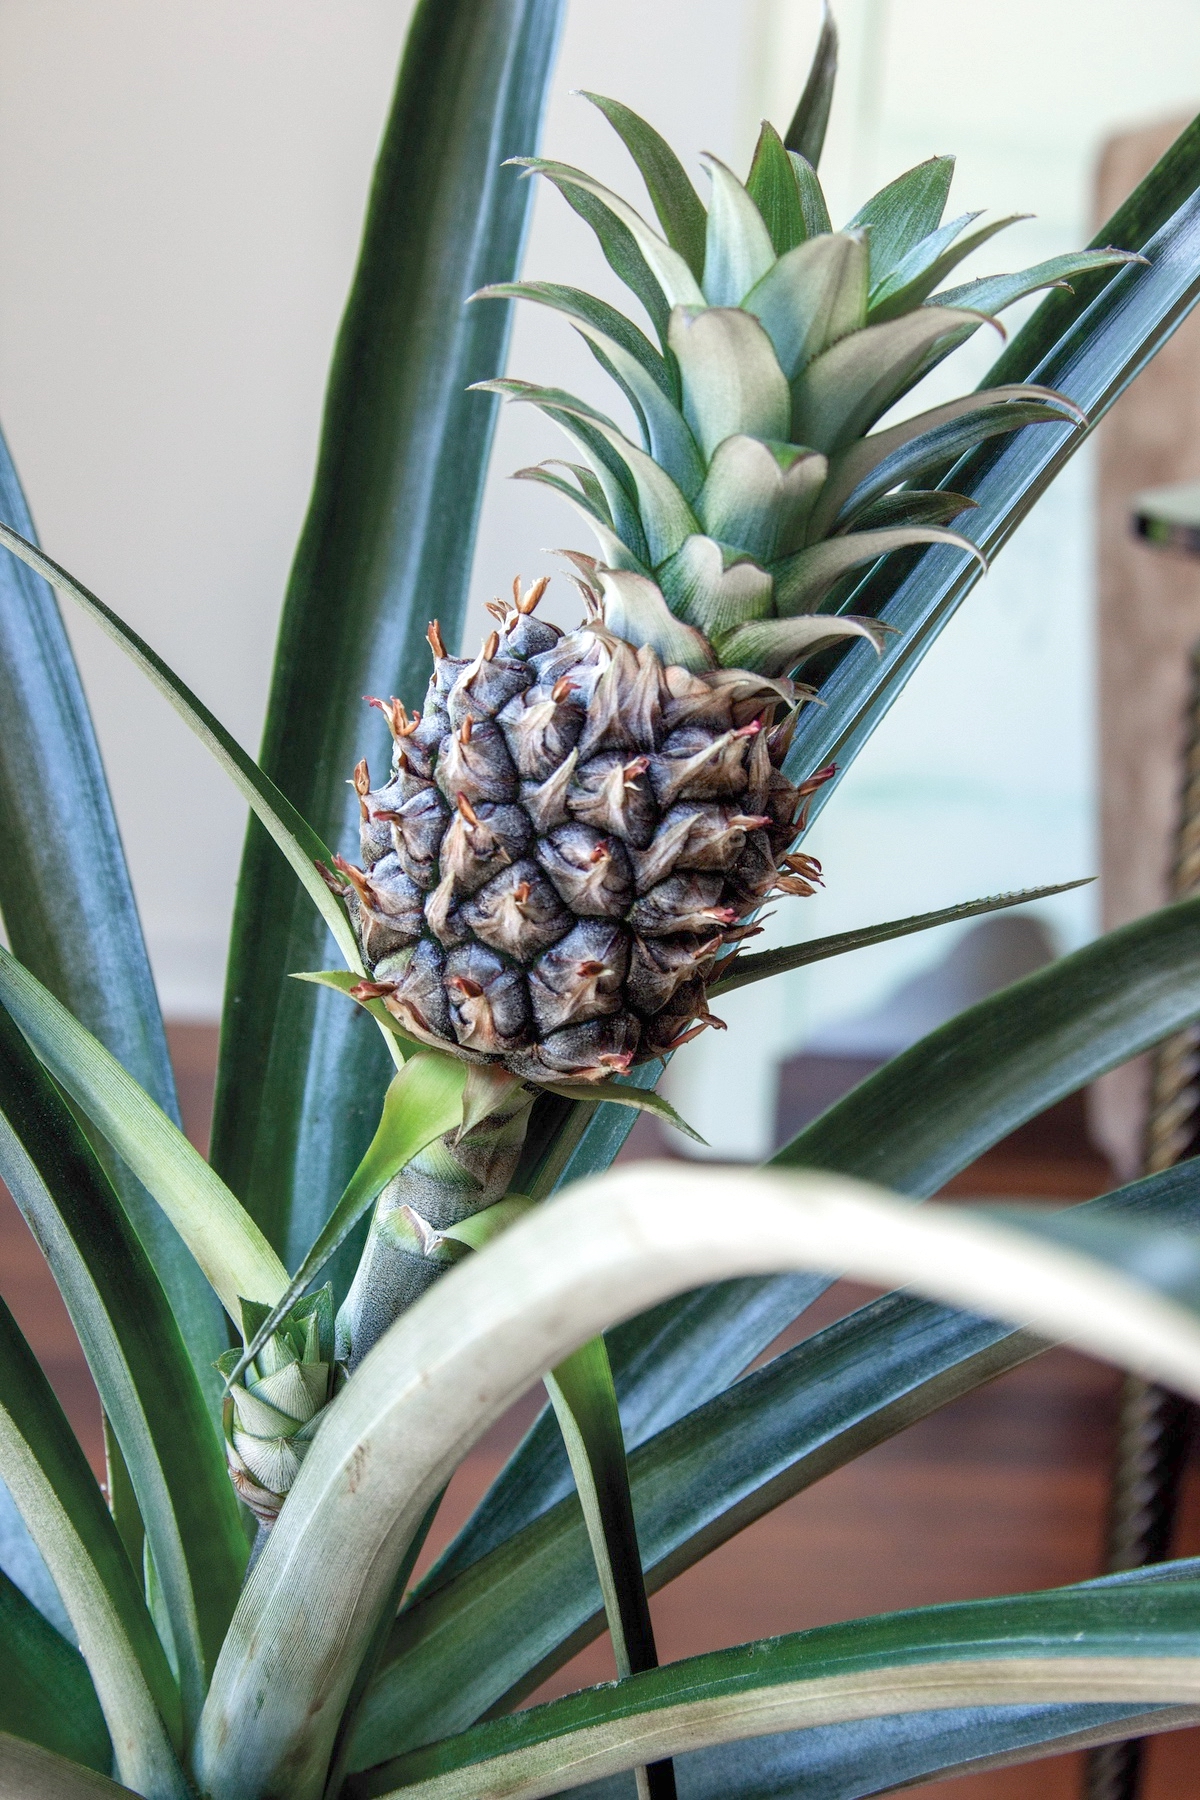 Begora’s pineapple has been growing for 2 years, after planting it’s top in soil.